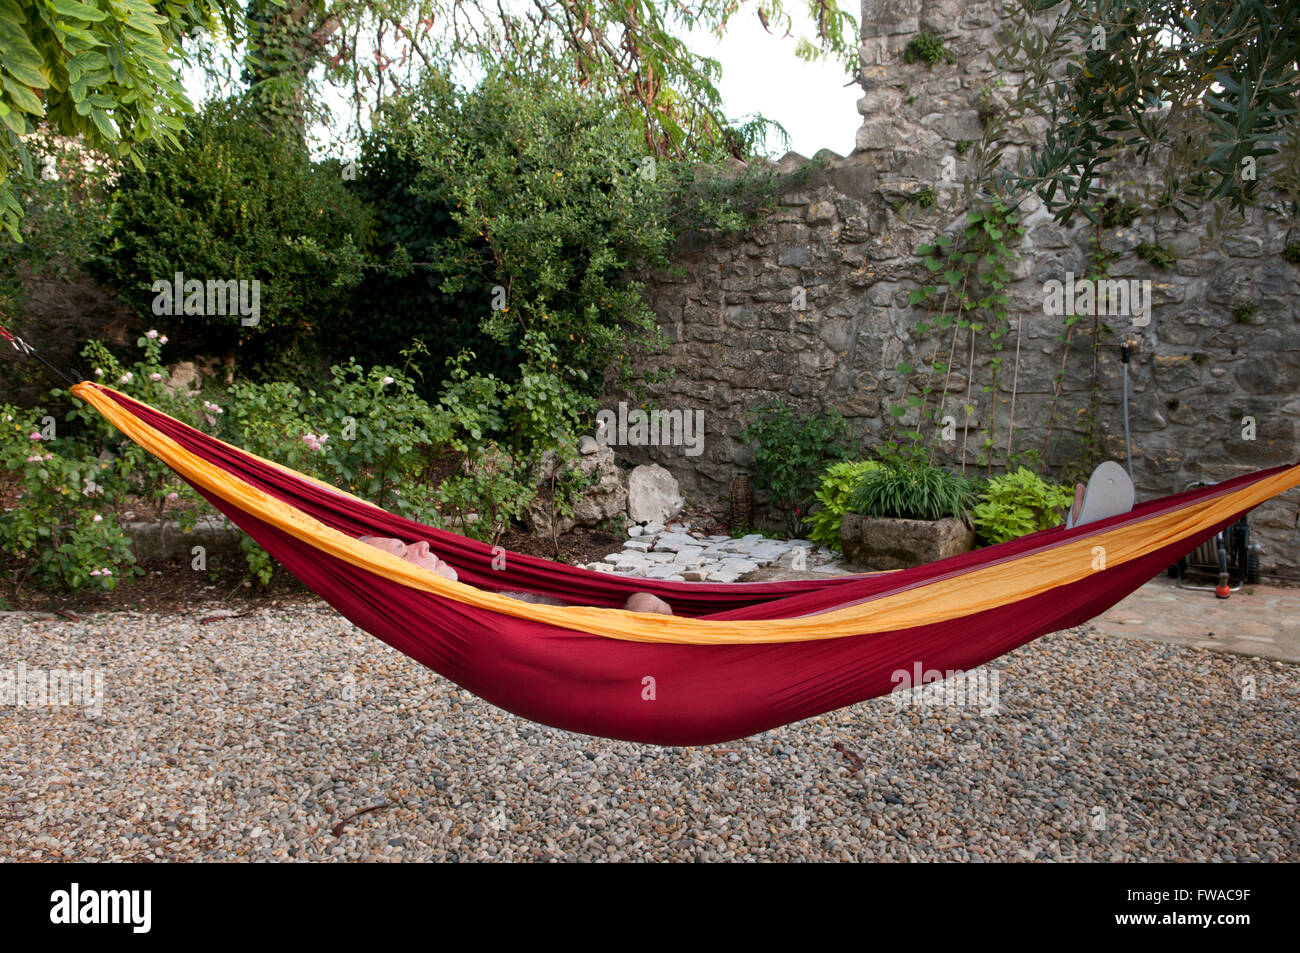 Mature man lying in a red and yellow hammock asleep Stock Photo